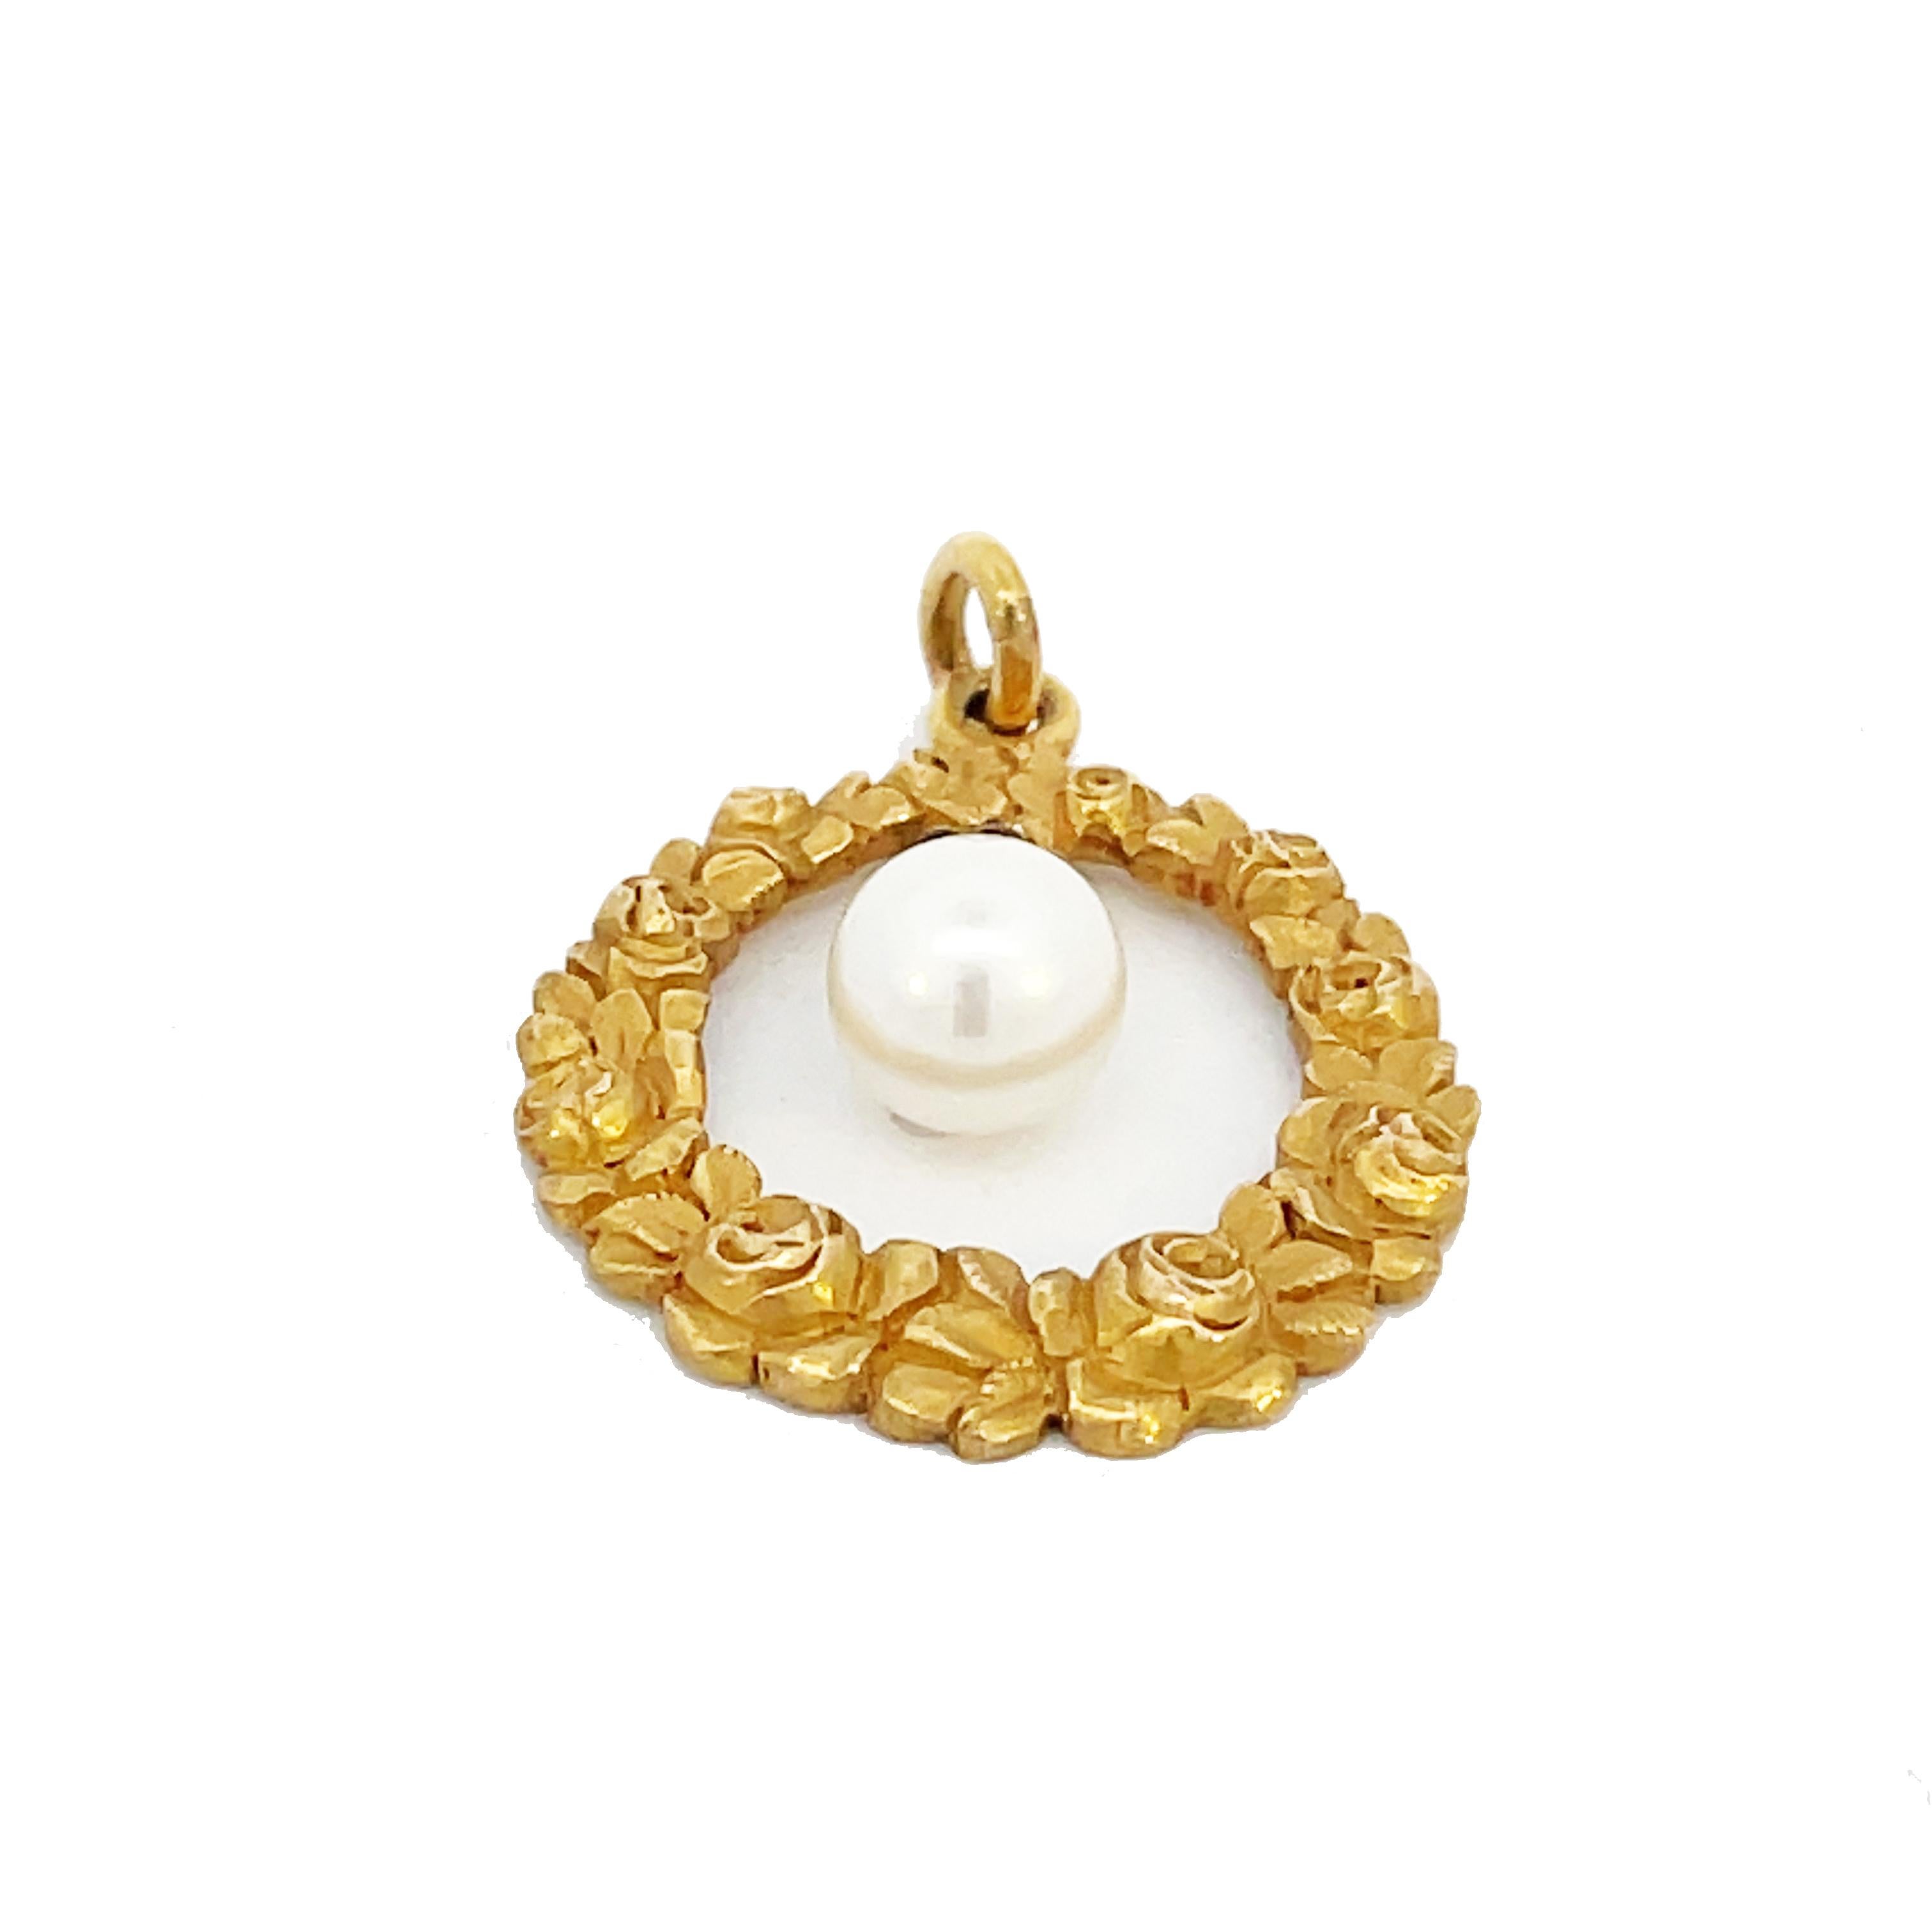 1910 Edwardian Austrian 14K Yellow Gold Pearl and Rose Pendant For Sale 3